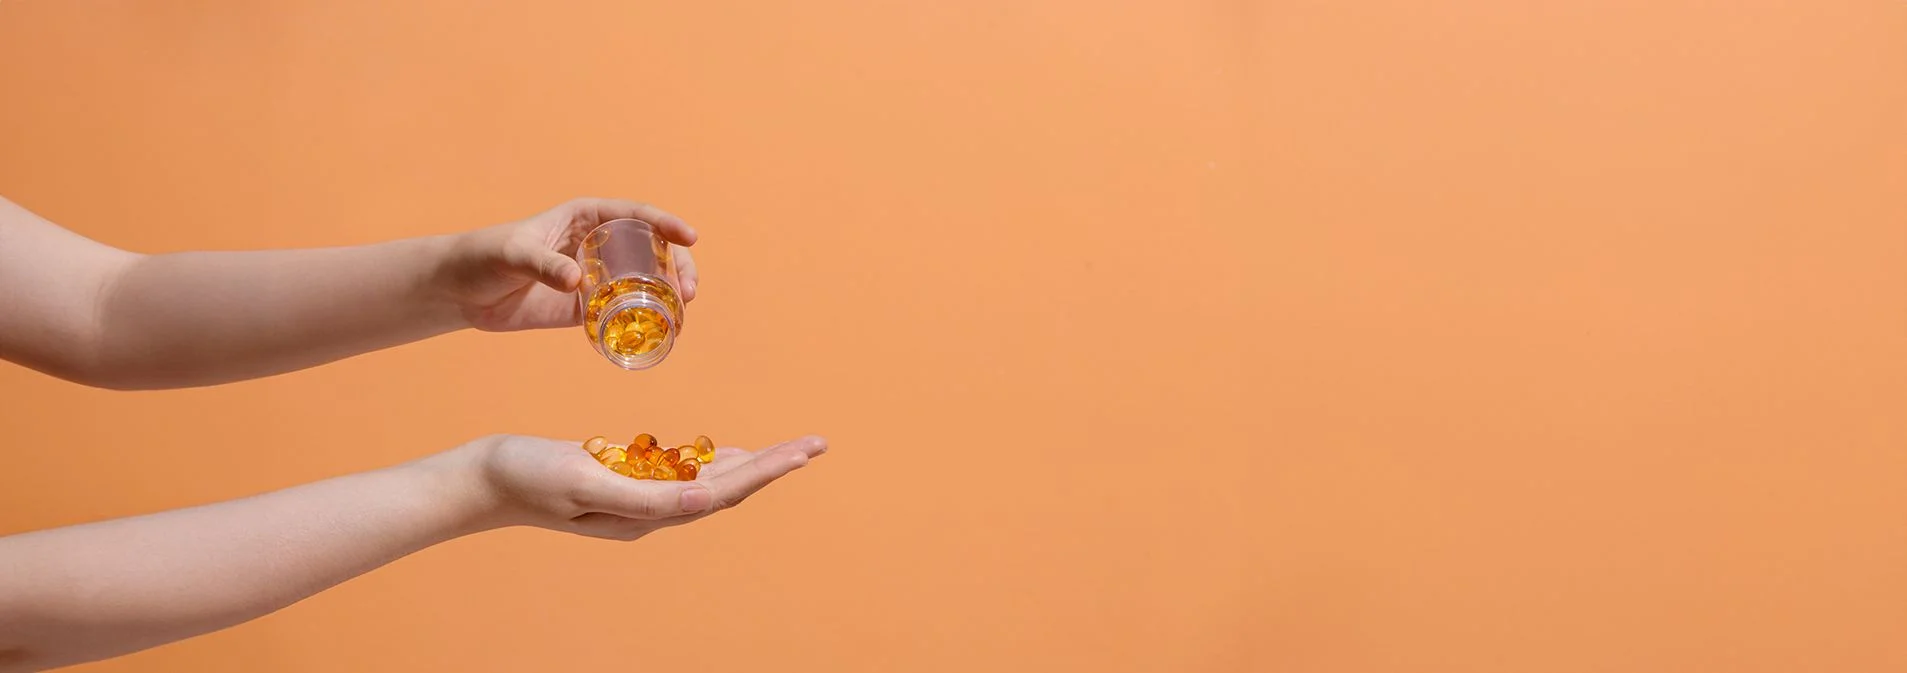 An outstretched hand pouring supplements into their other hand with an orange background